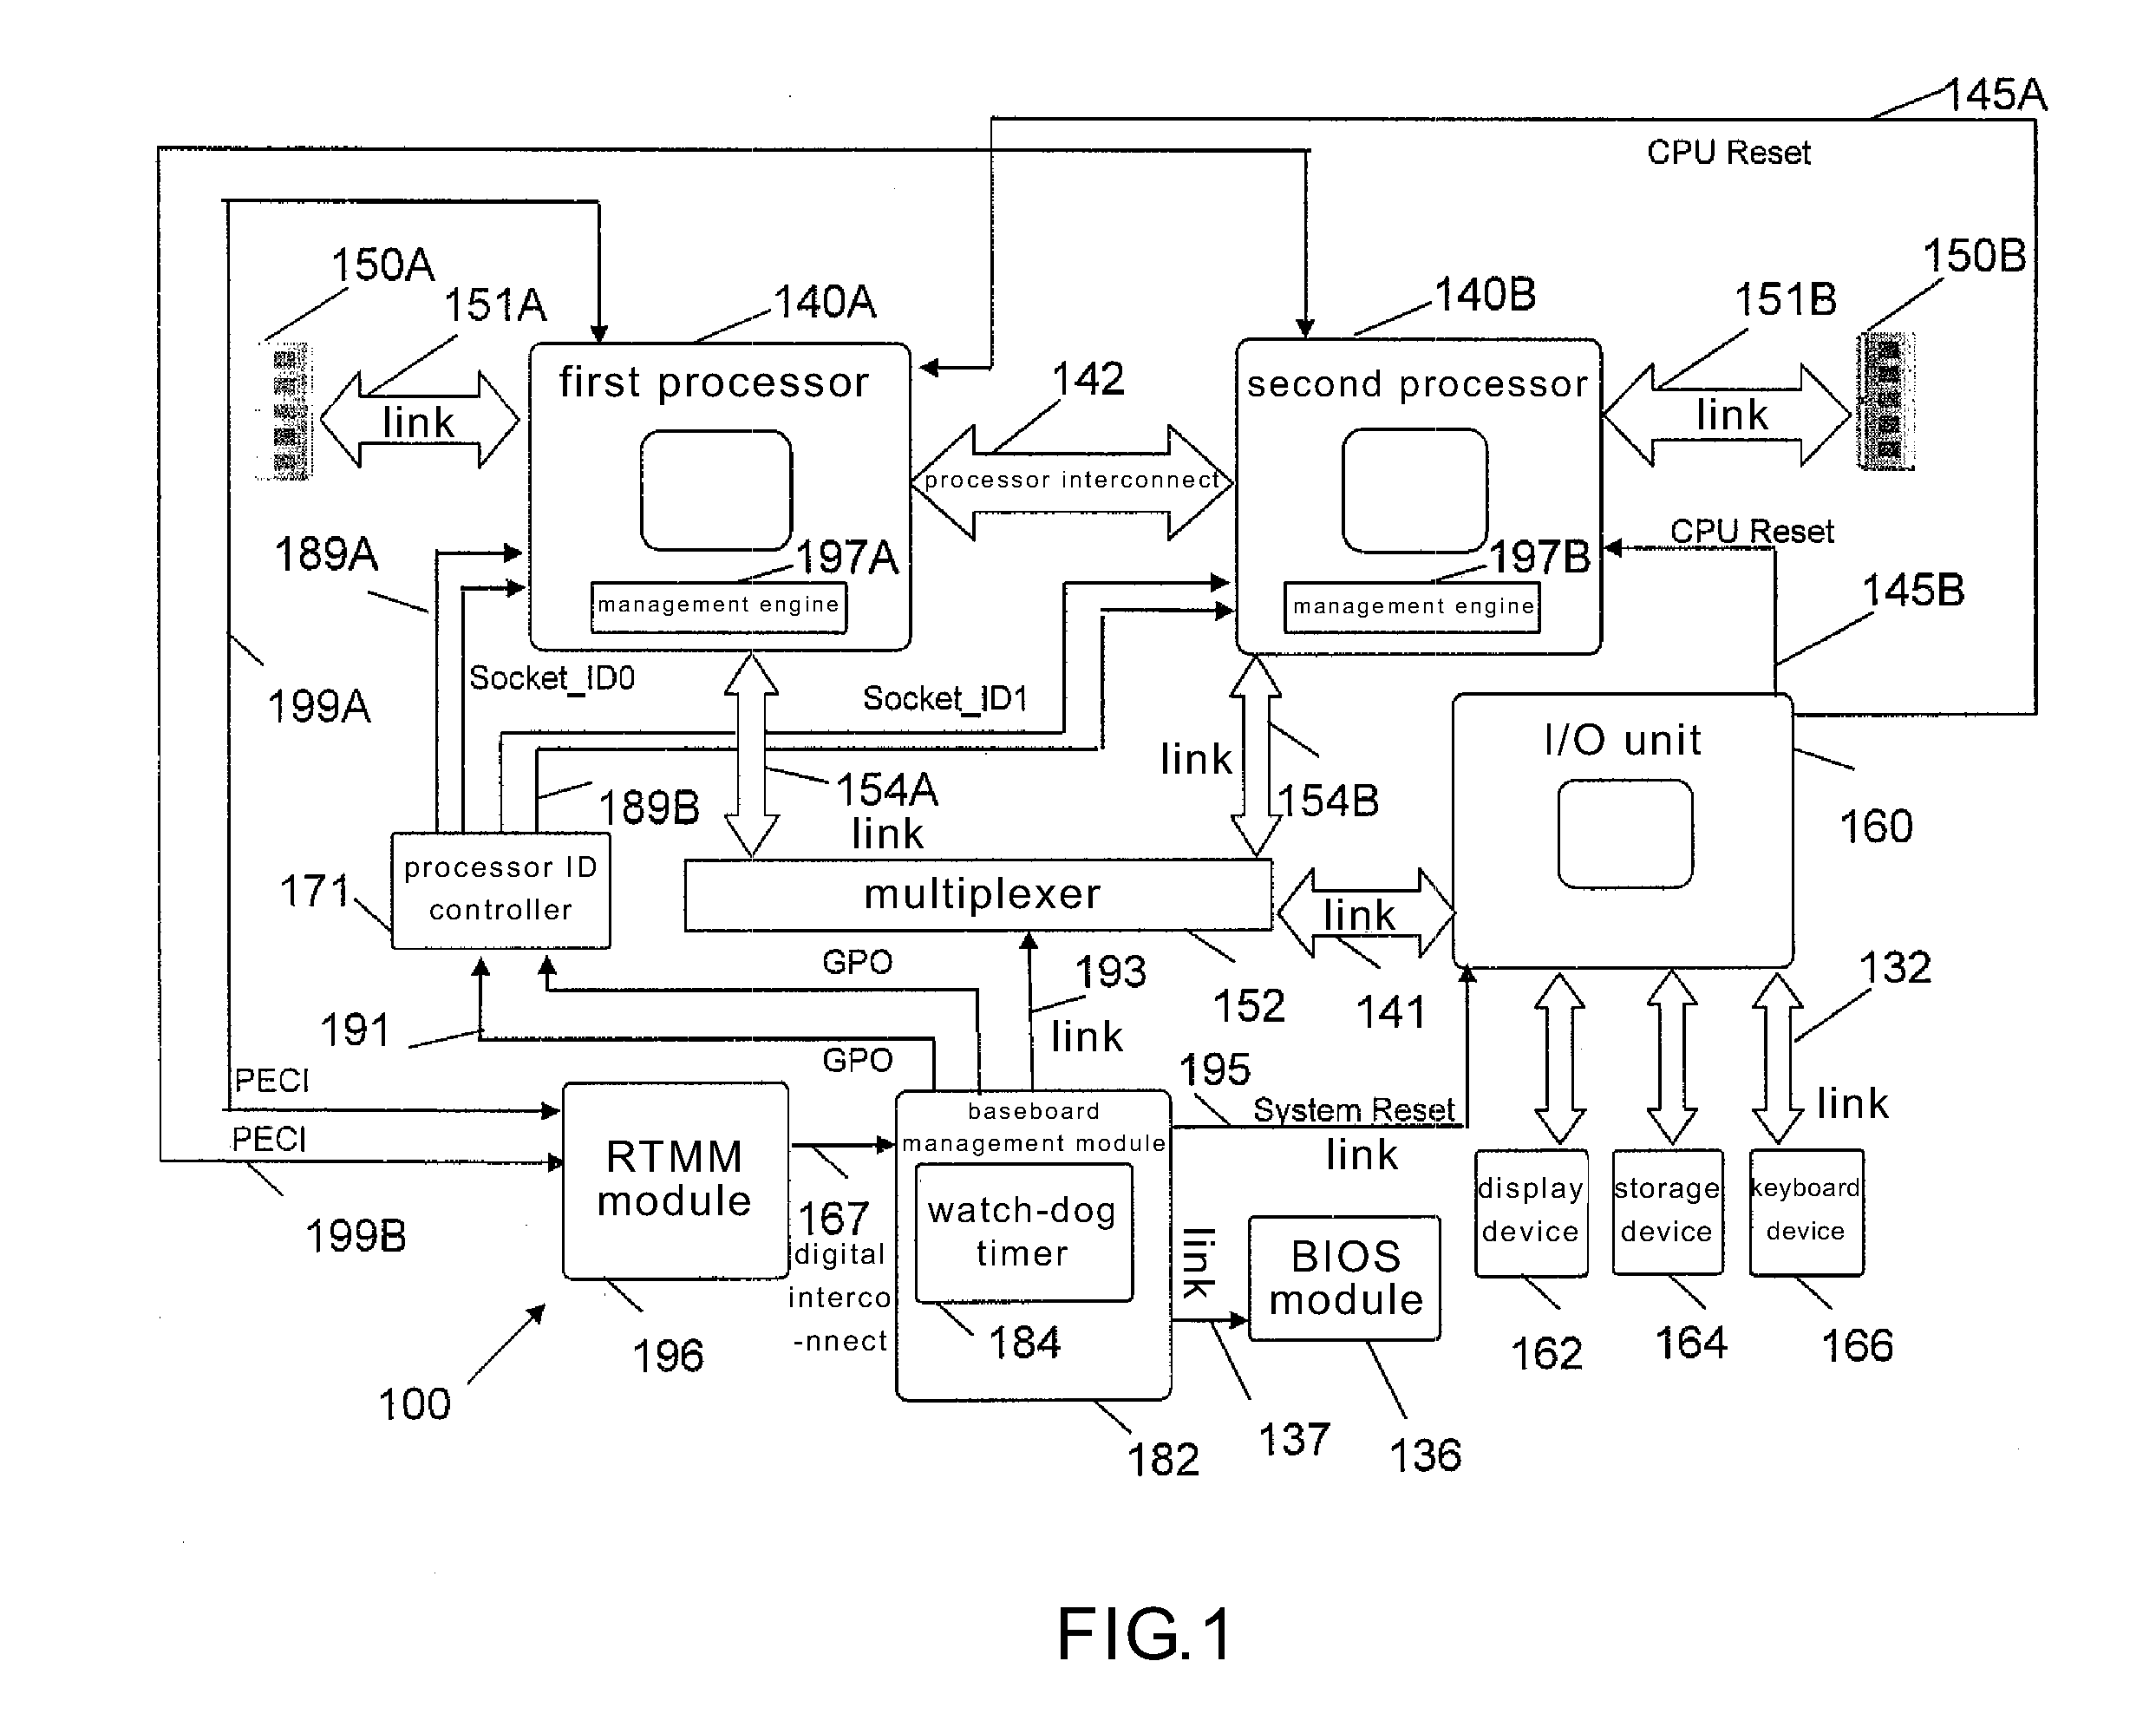 Apparatus and method for handling failed processor of multiprocessor information handling system